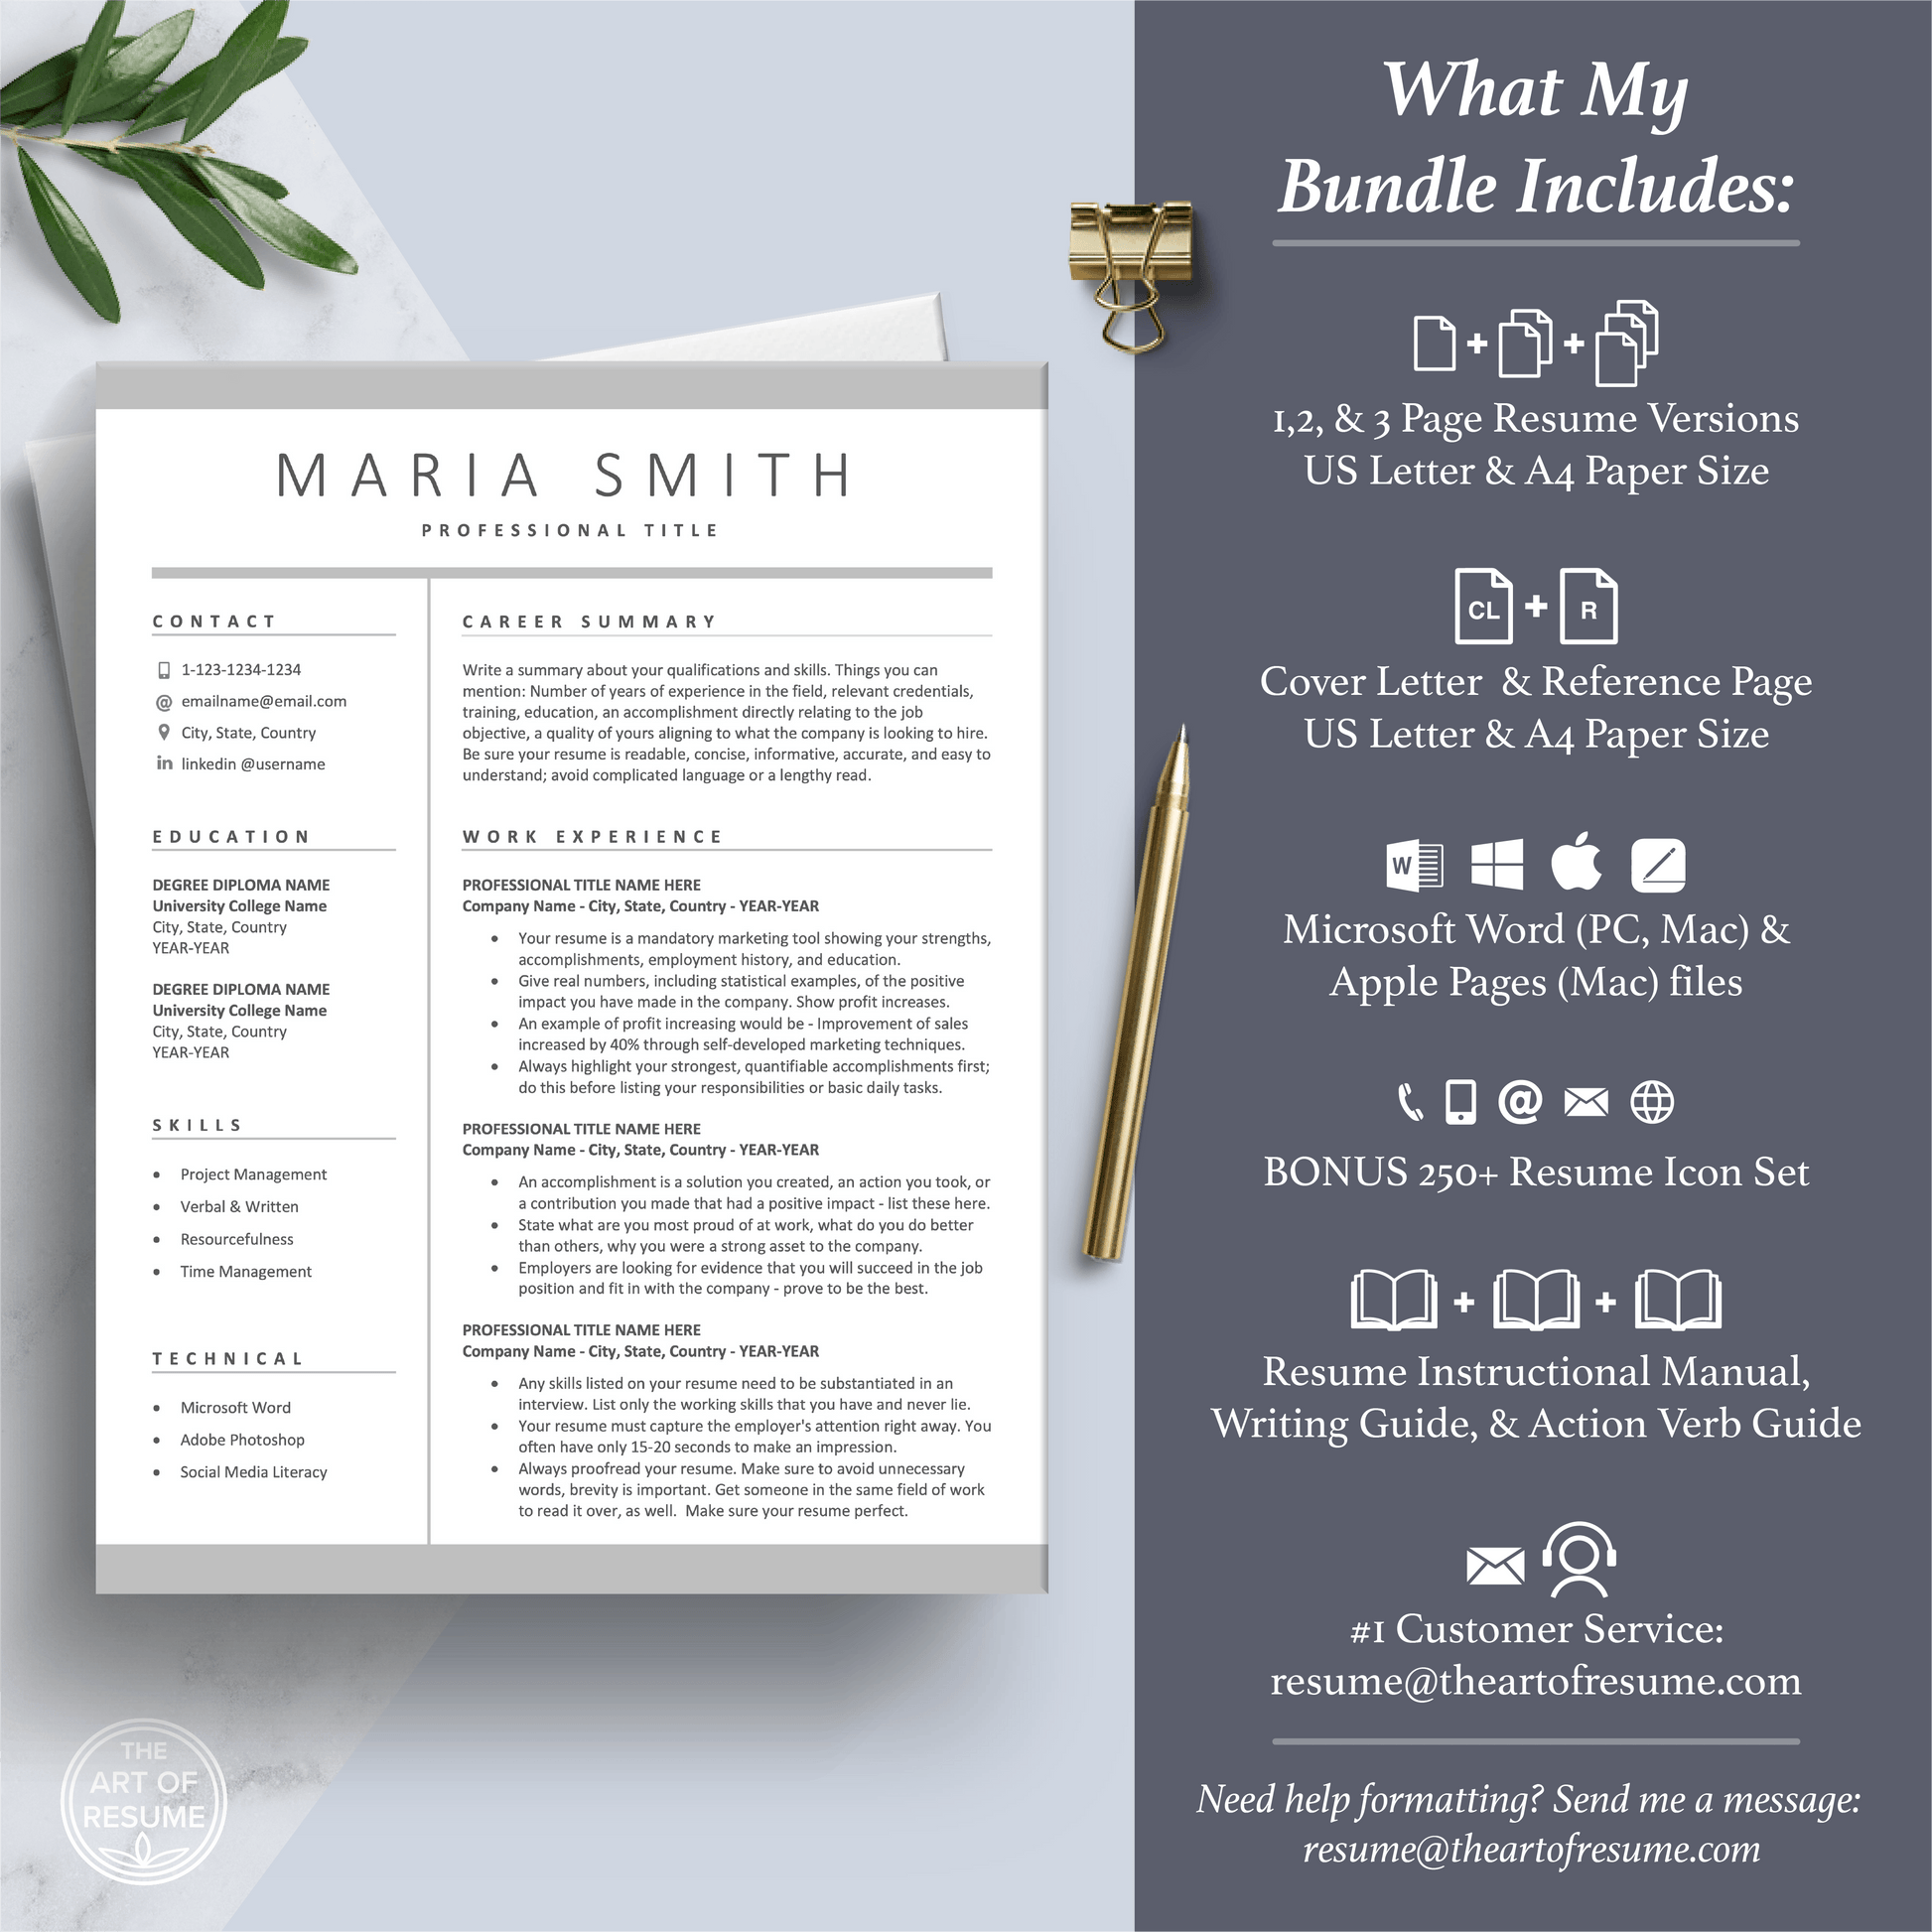 The Art of Resume Templates | Professional Resume CV Template Maker 3, Cover Letter, Reference Page, Mac, PC, A4 Paper, US size, Free Guide, The Art of Resume Writing, 250 Bonus Resume Icons